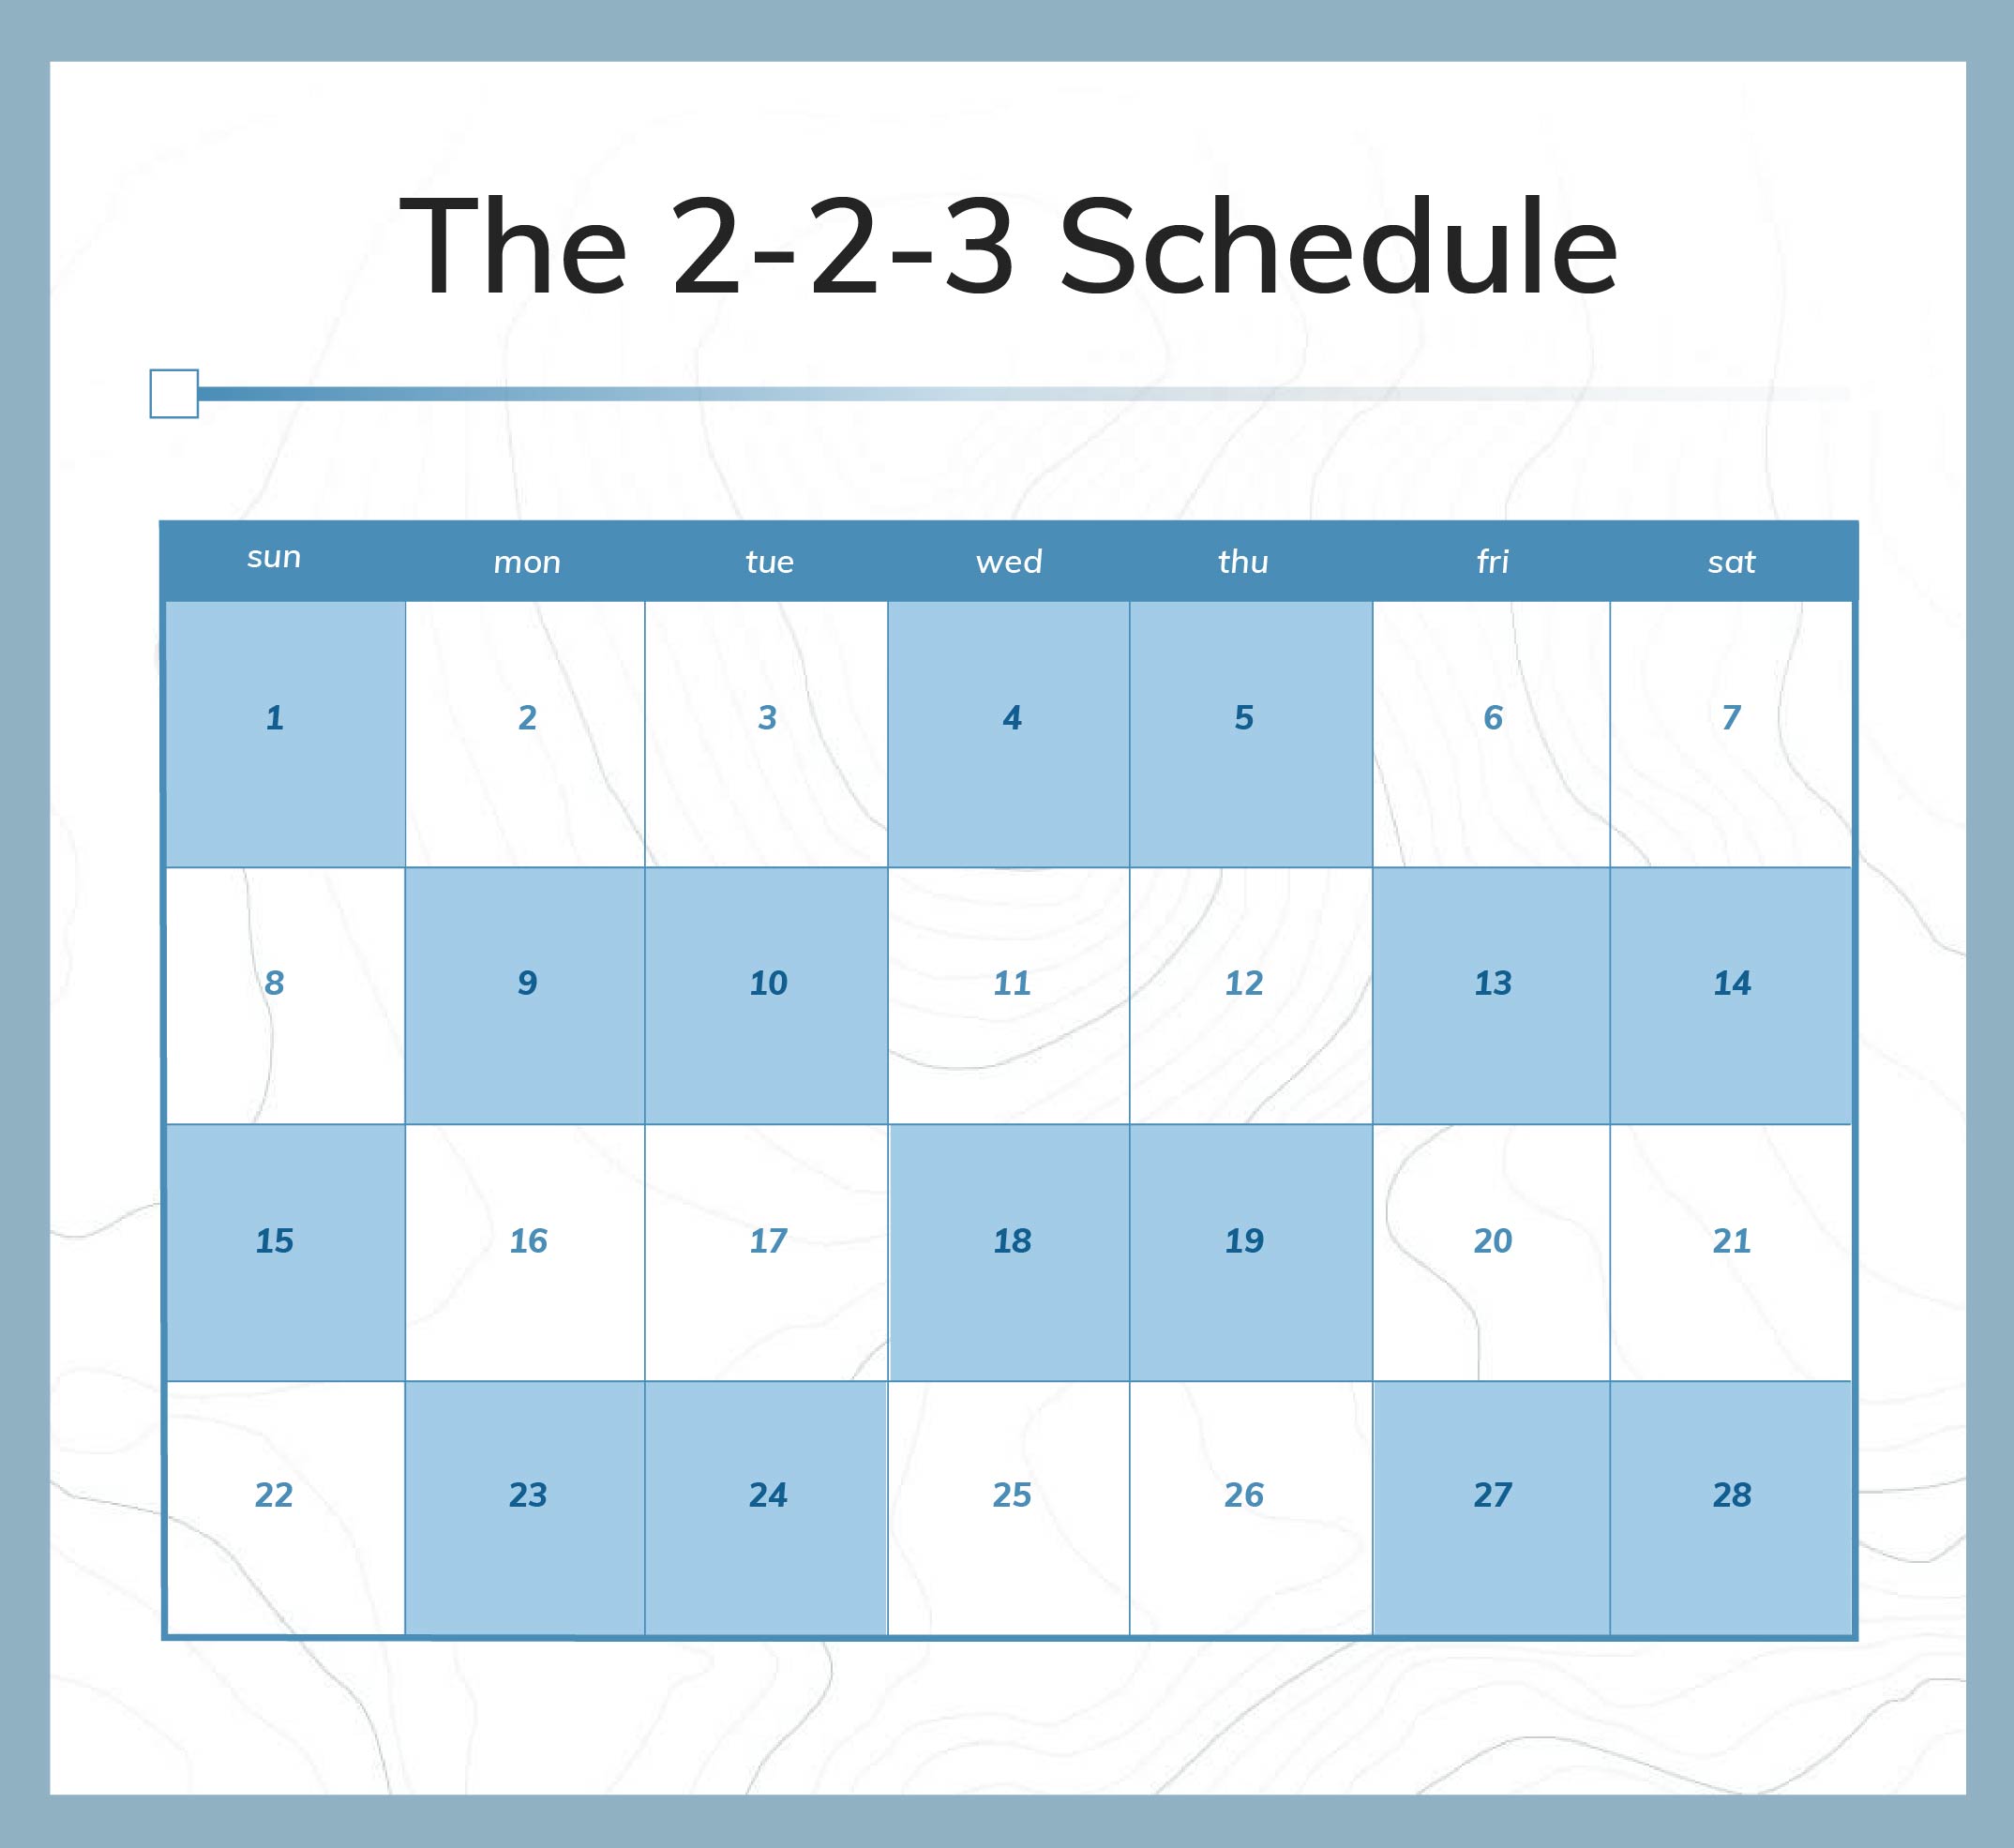 The 2-2-3 Schedule